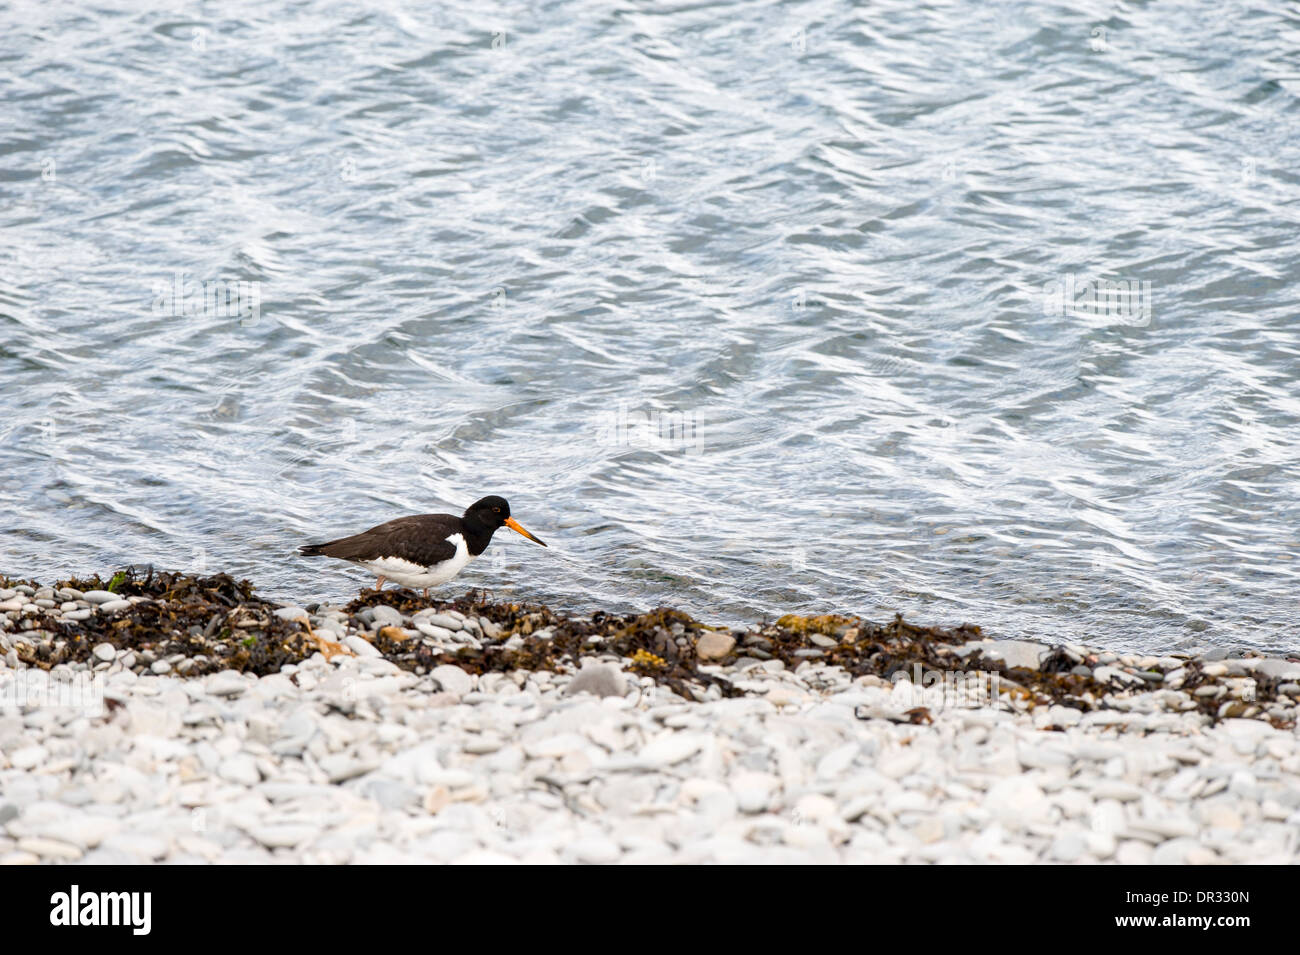 Oyster Catcher, taking an early morning stroll along the edge of Loch Kanaird, Ardmair, Scottish Highlands. Stock Photo